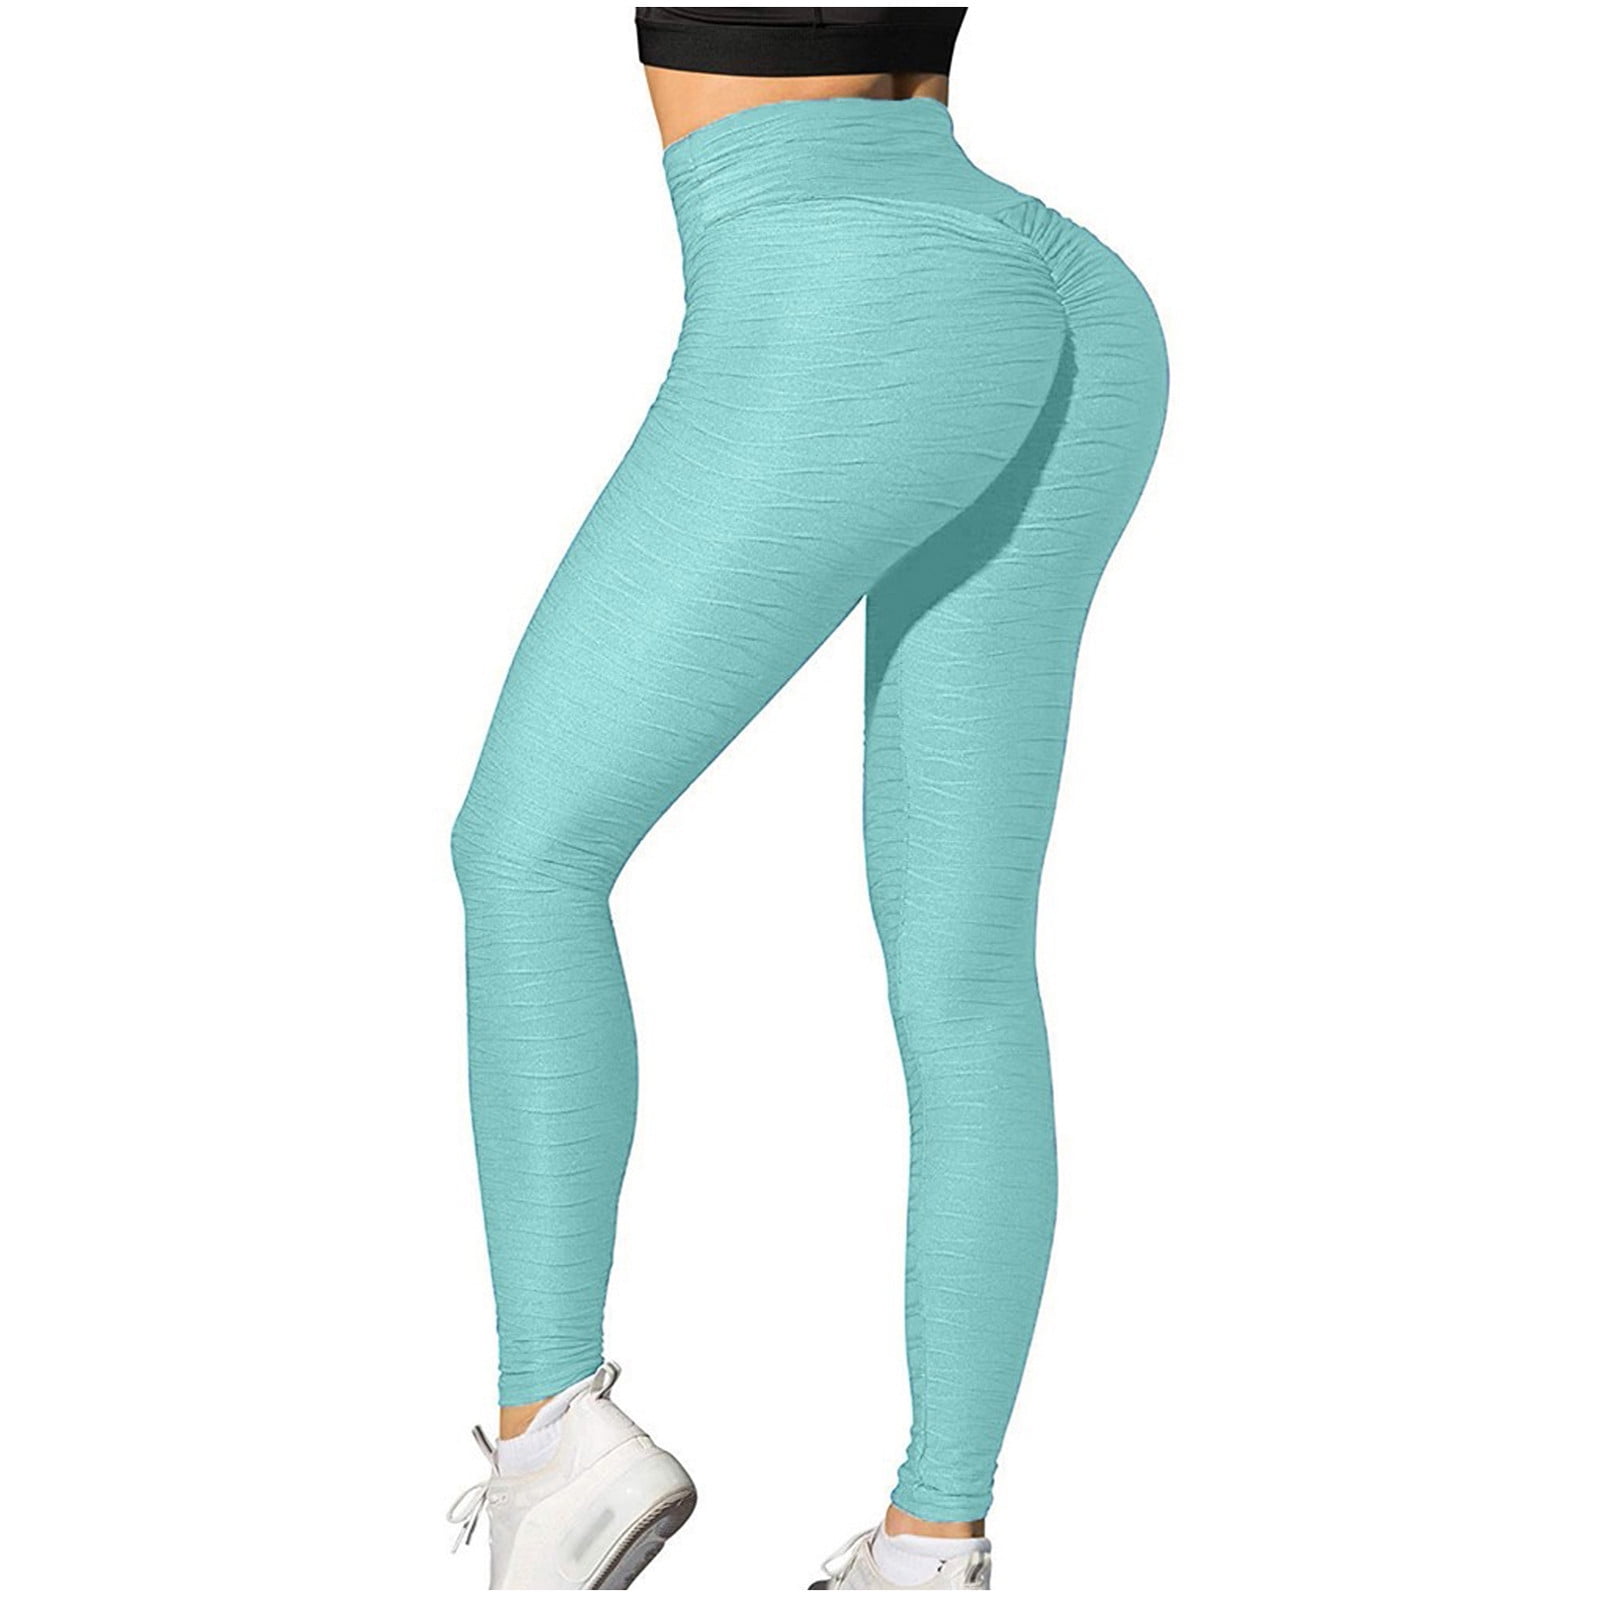 Jean Look Leggings For Women High Waist Tummy Control With Back